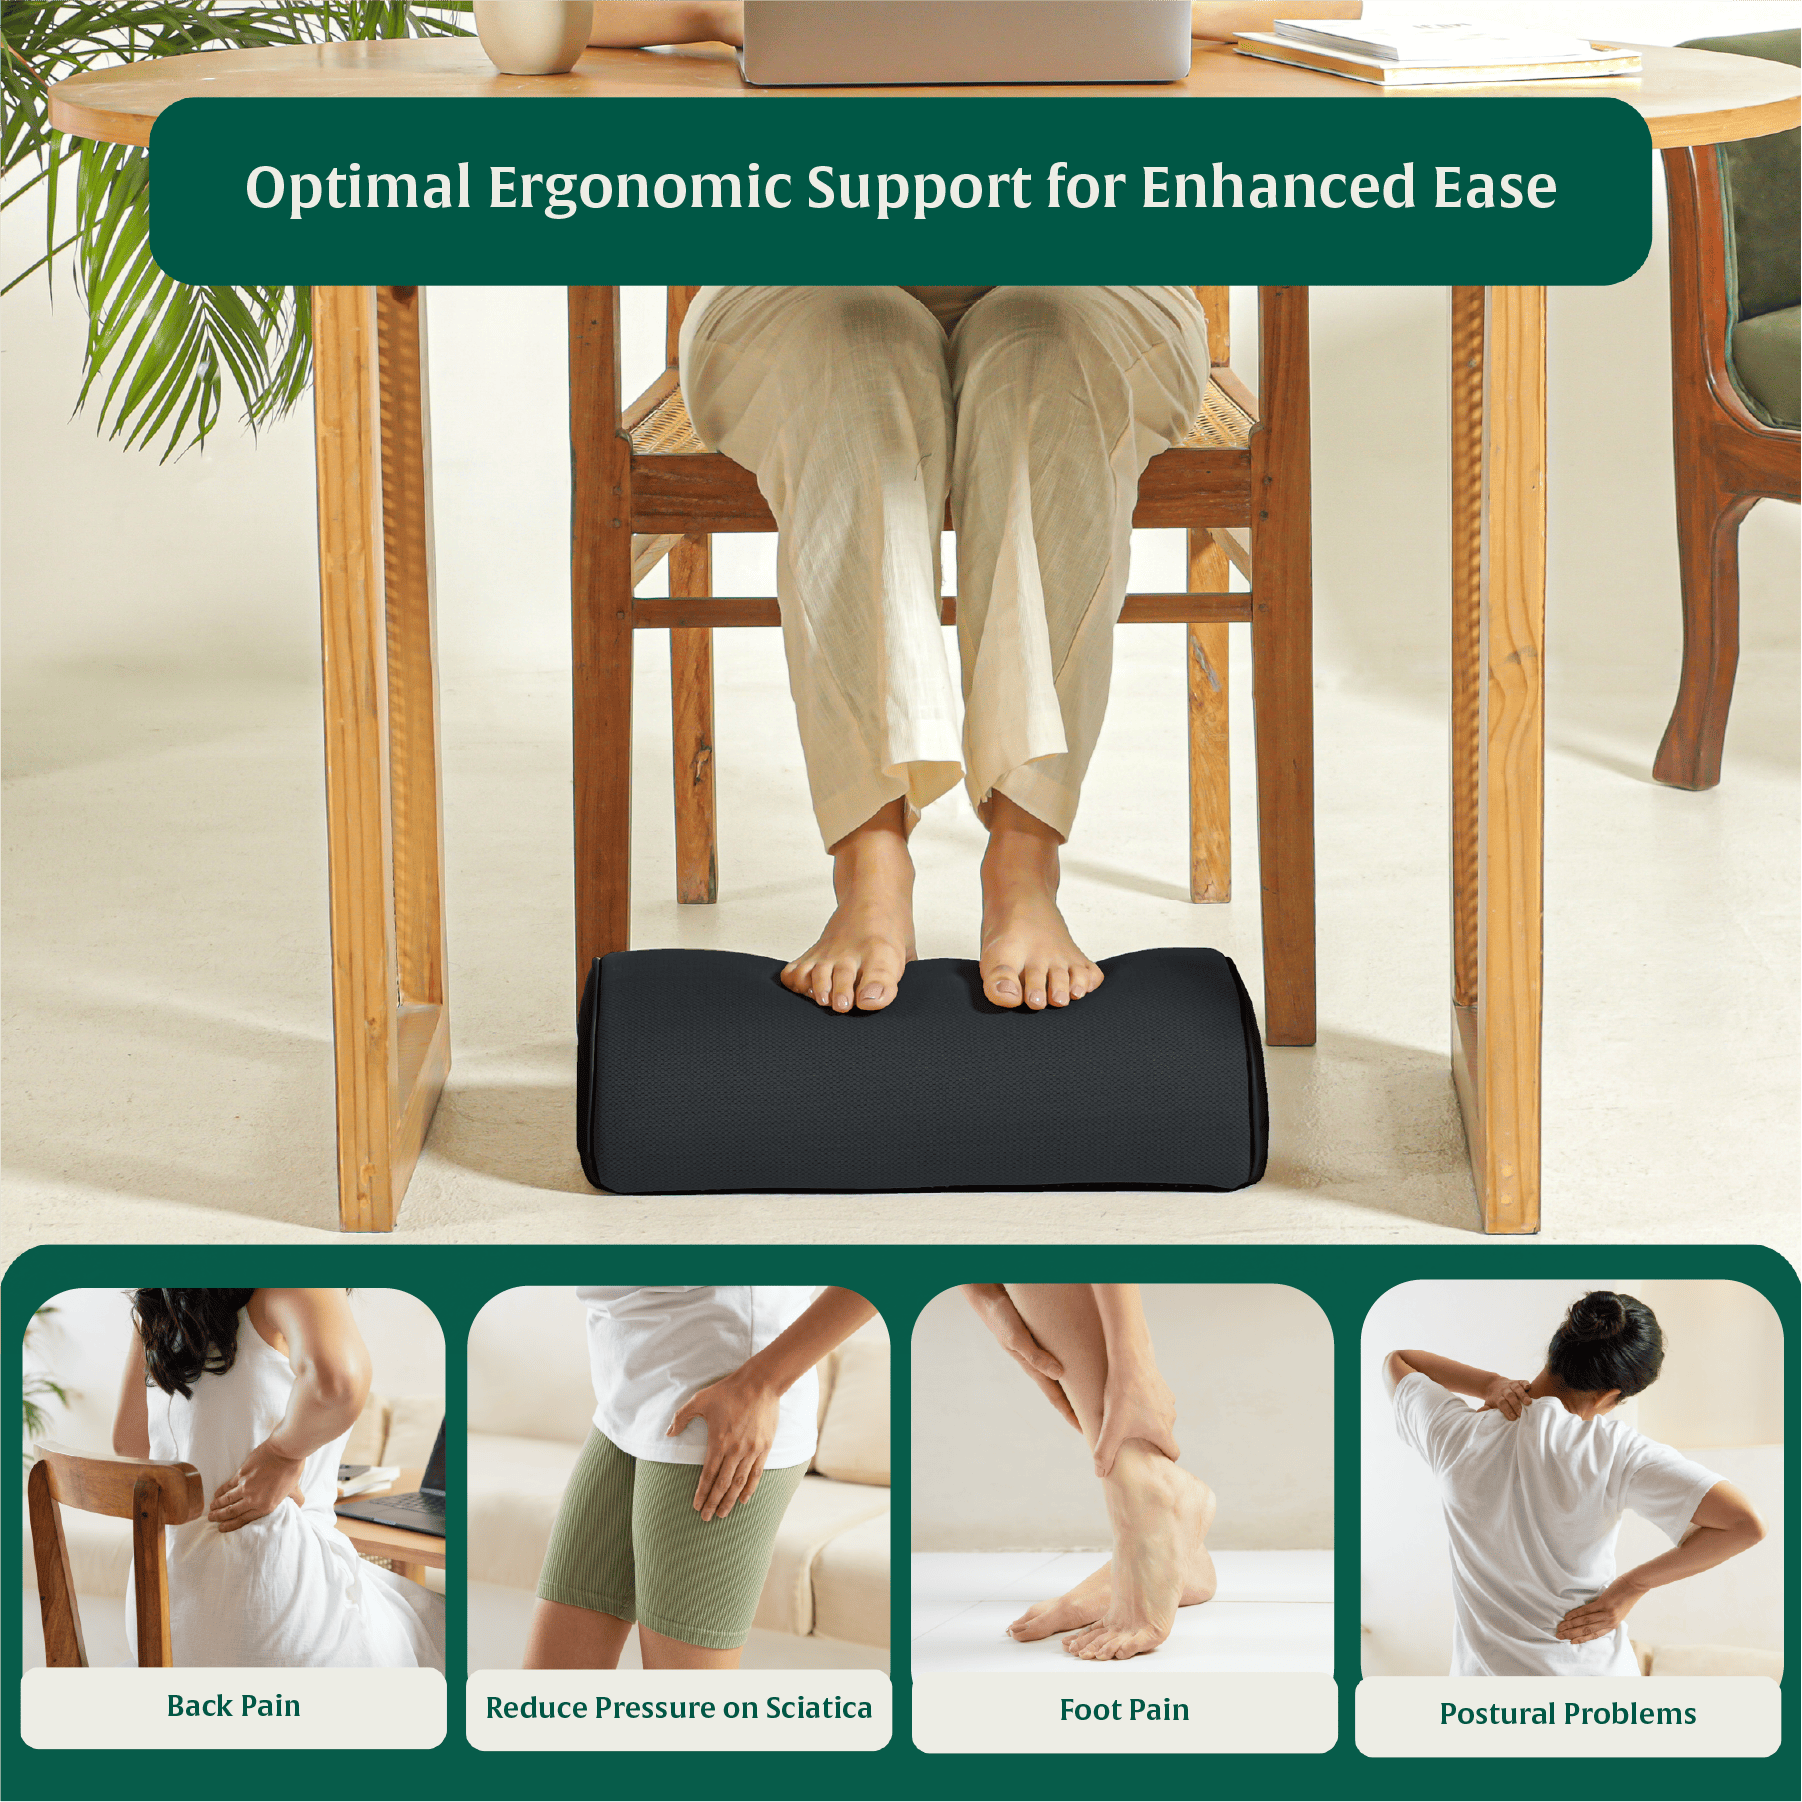 BeatriX - High Resilience (HR) Foam Foot Rest Cushion for Feet & leg Support - Firm Support The White Willow 